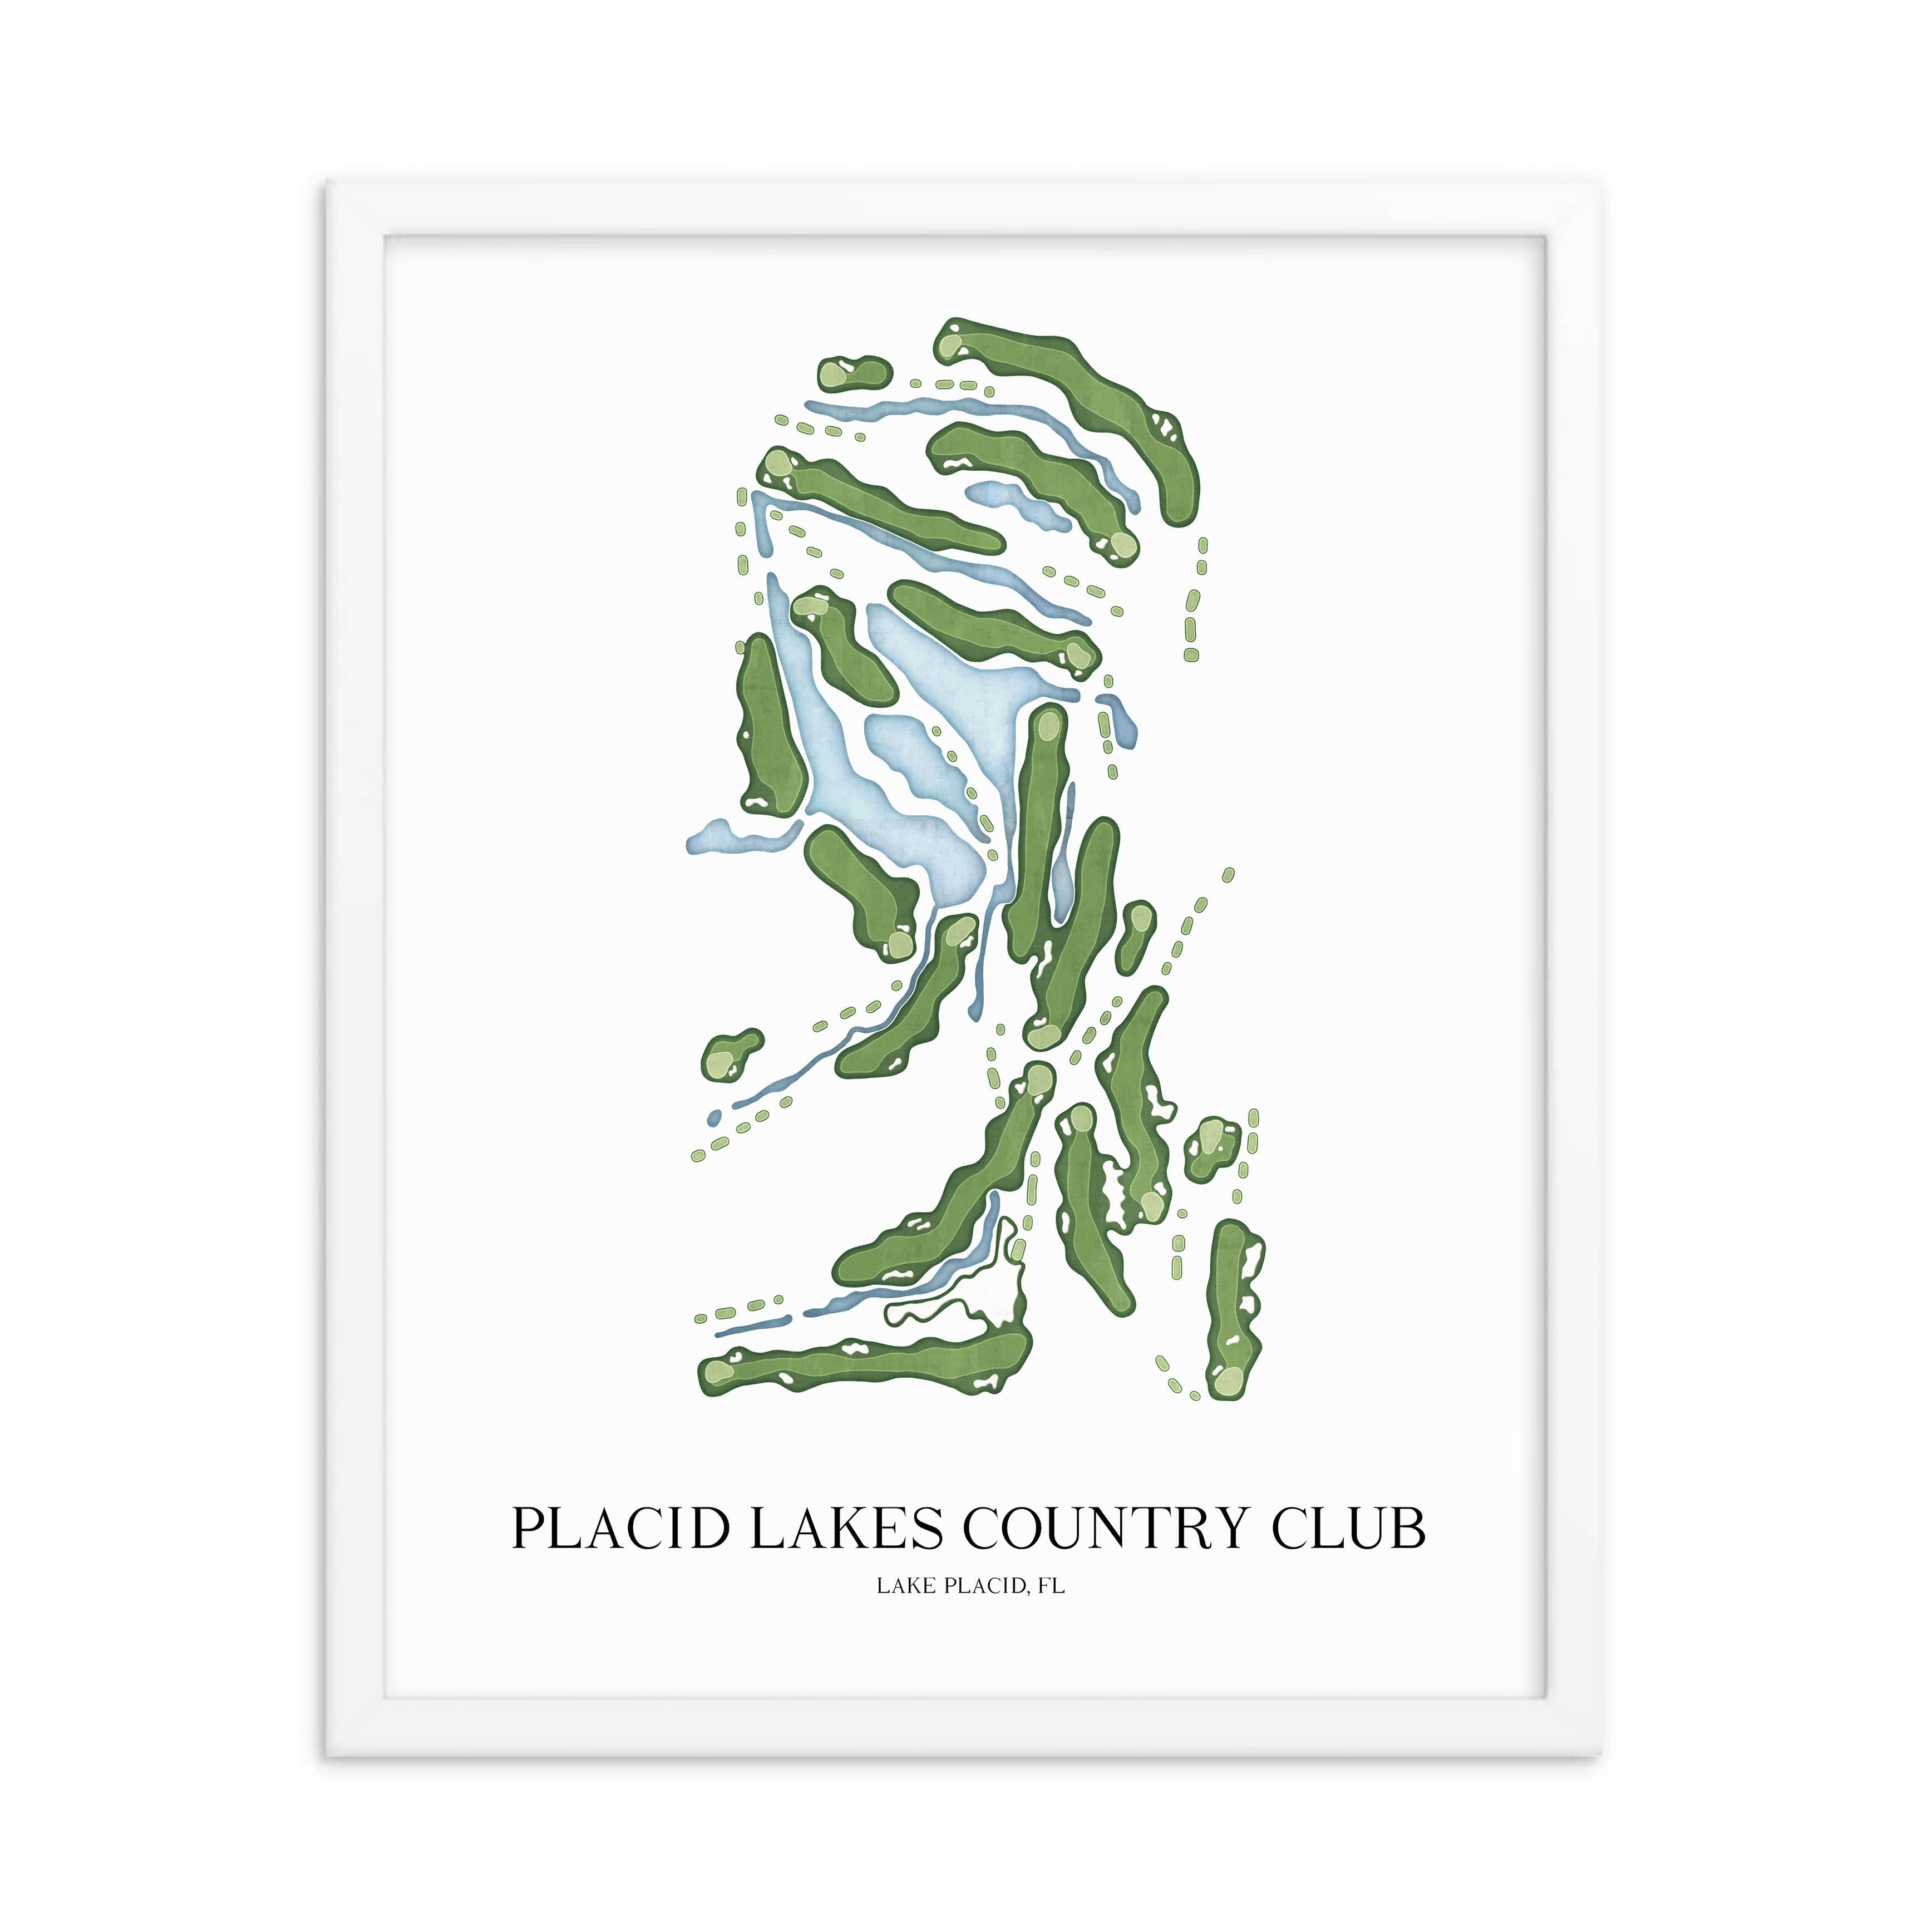 The 19th Hole Golf Shop - Golf Course Prints -  Placid Lakes Country Club Golf Course Map